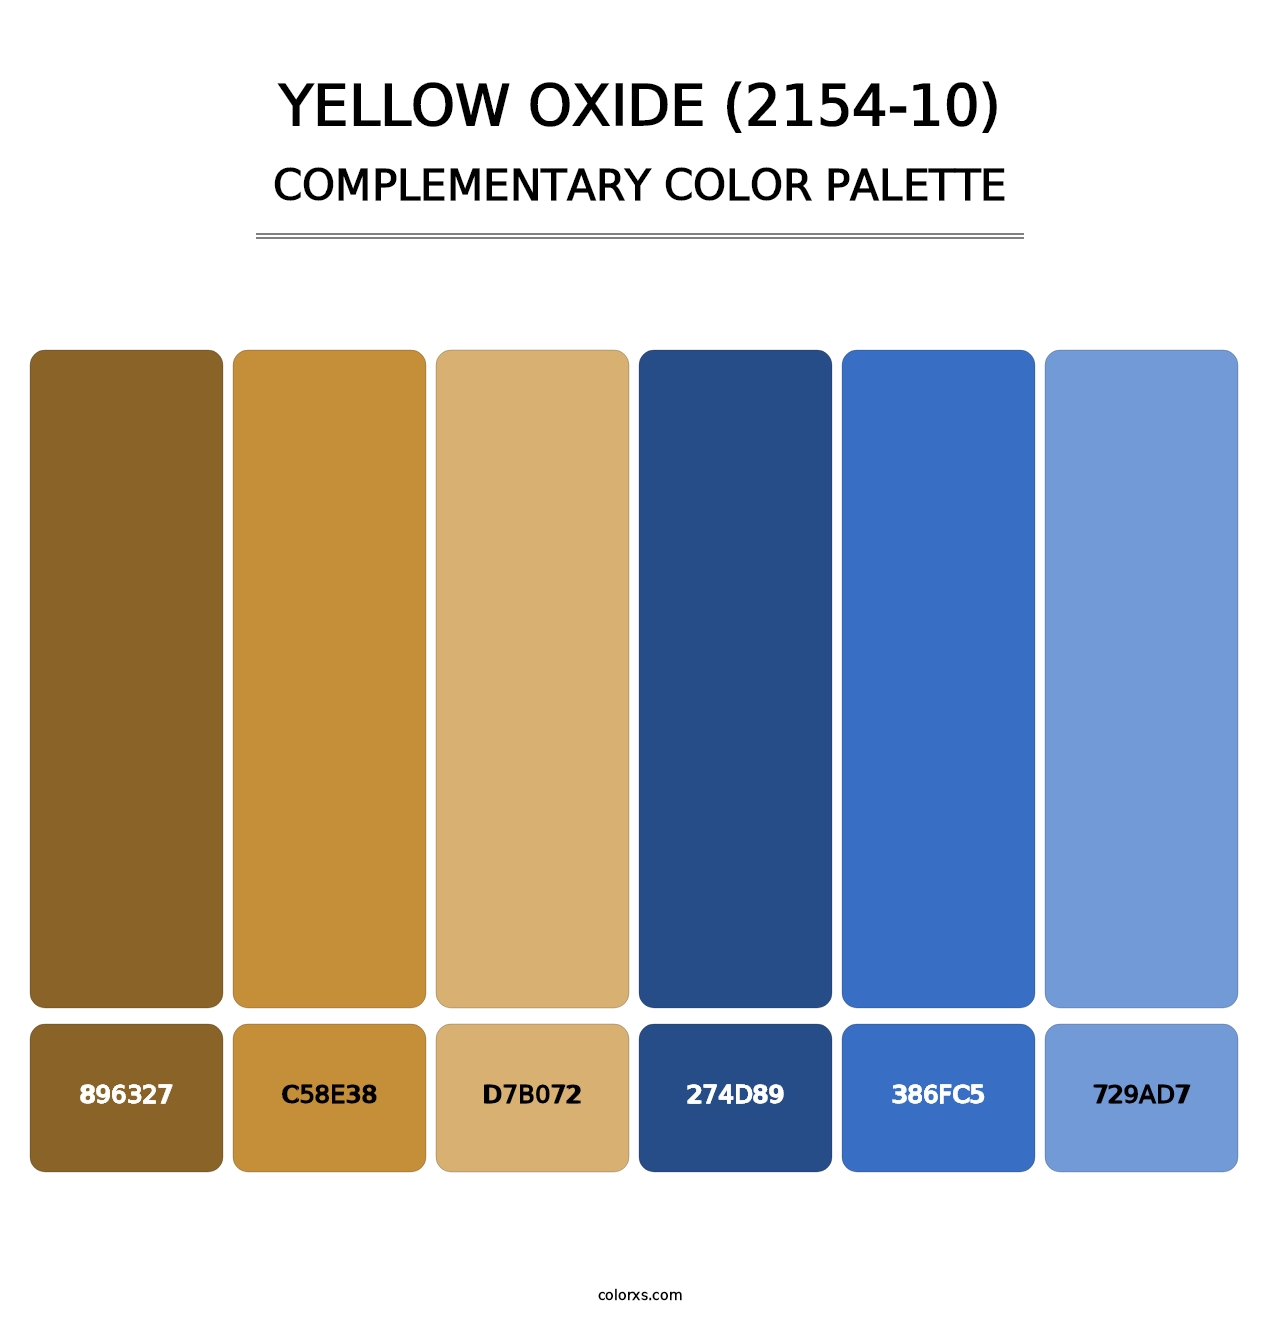 Yellow Oxide (2154-10) - Complementary Color Palette